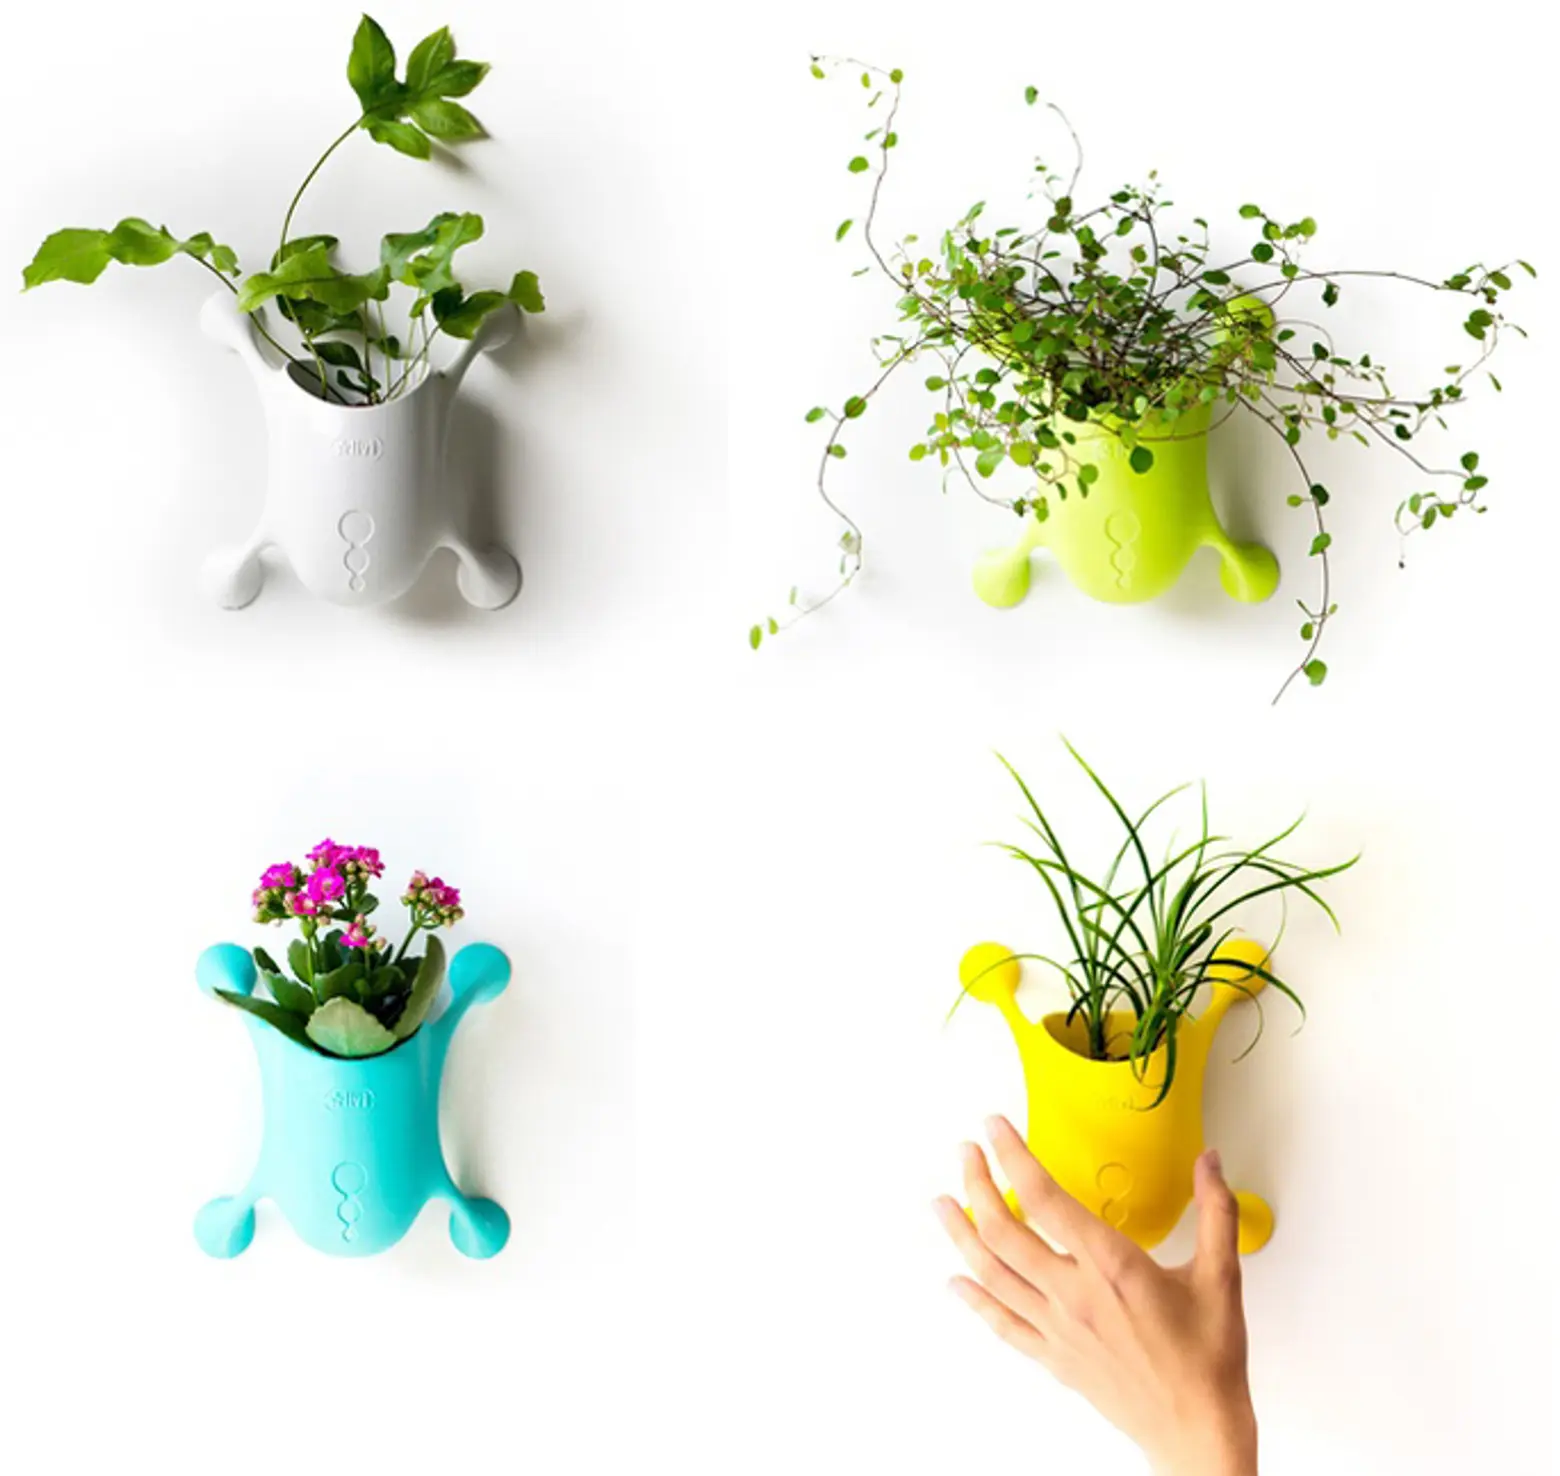 Livi Transforms the Traditional Flower Pot With Biomimicry and a Smart Stick-On Design